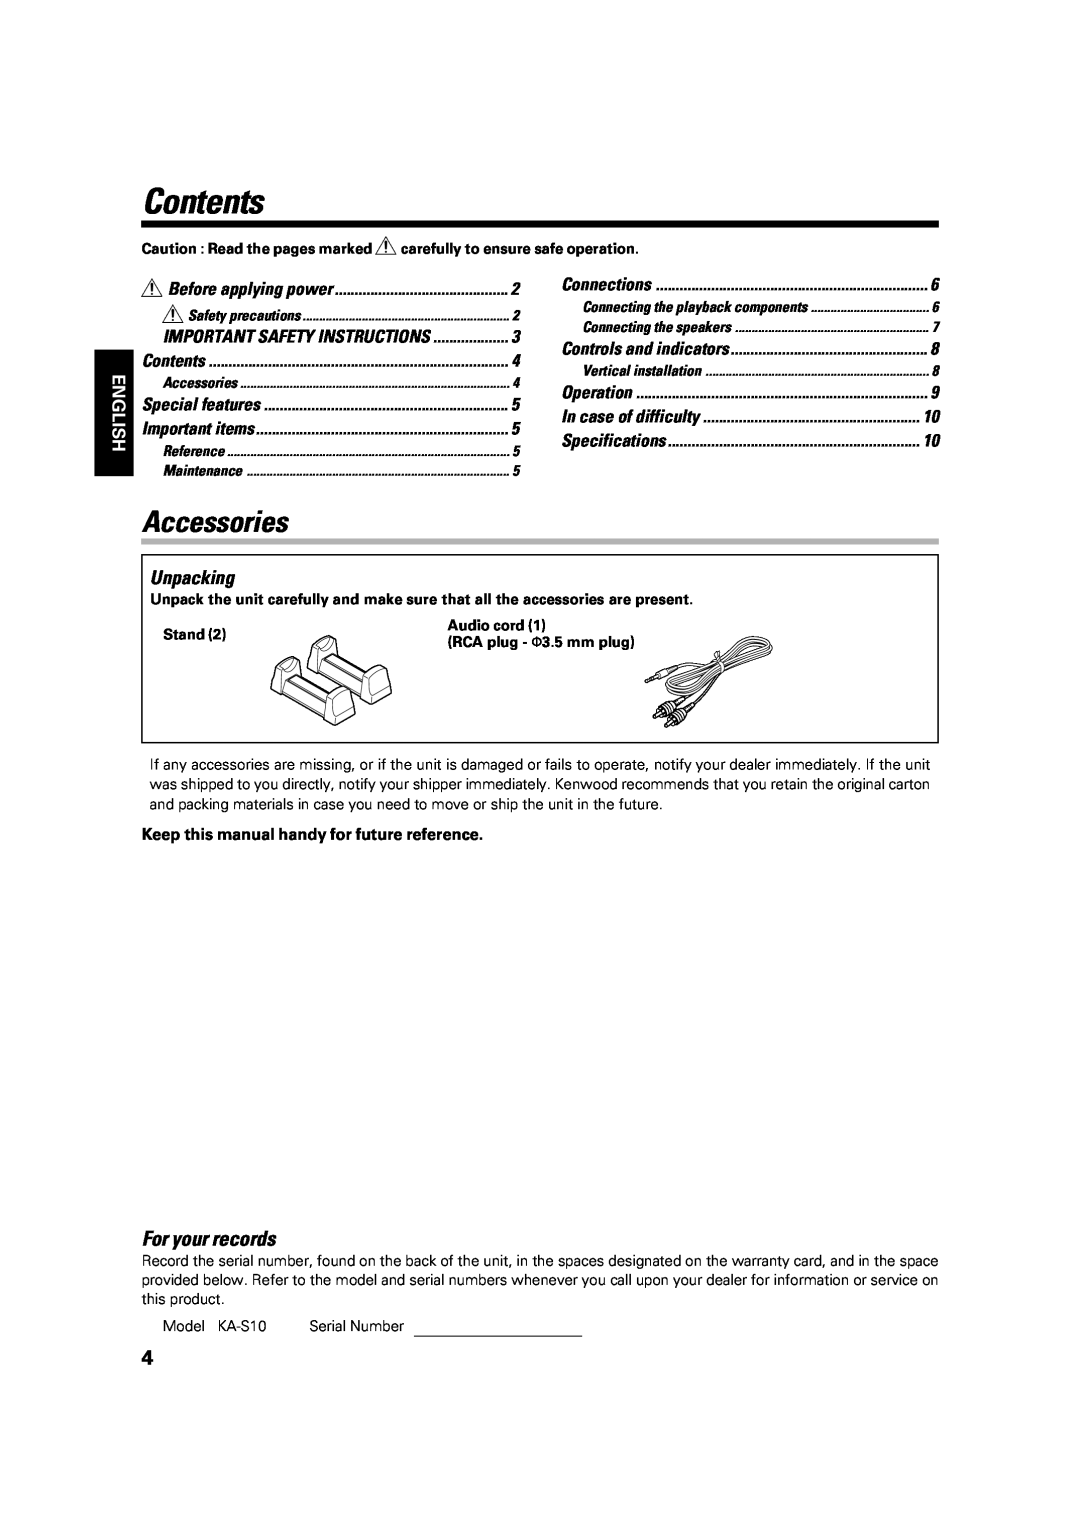 Kenwood KA-S10 Contents, Accessories, For your records, Keep this manual handy for future reference, Unpacking, English 